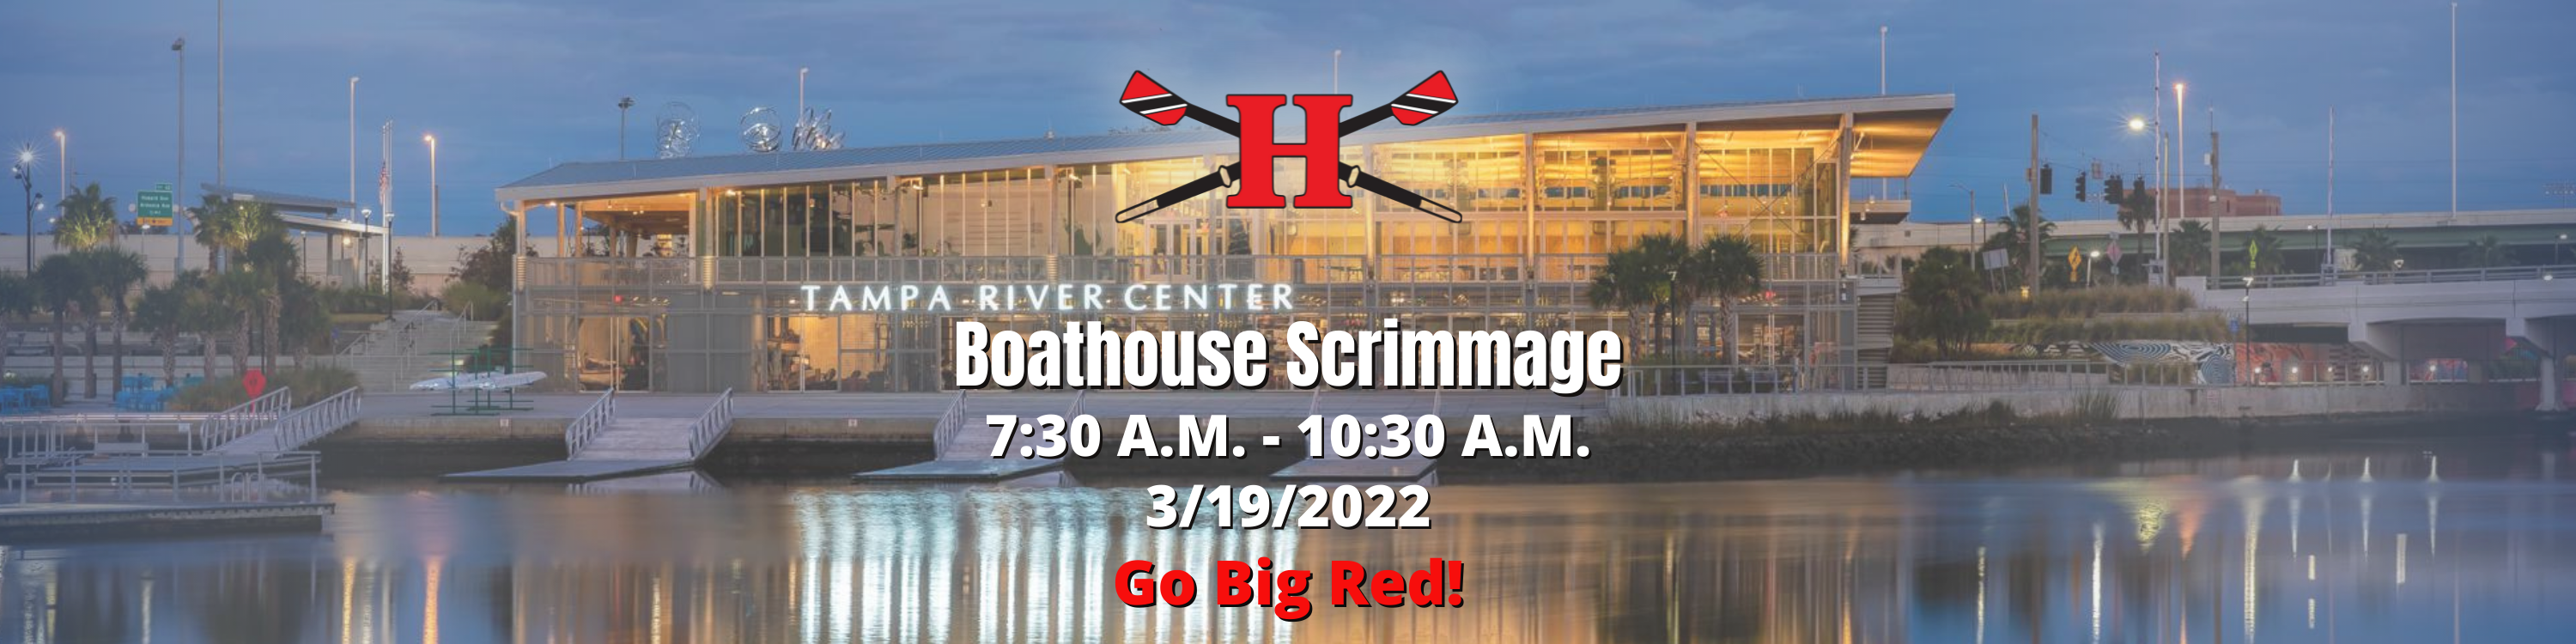 Copy of boathouse scrimmage 3 19 2022 (8 × 2 in)